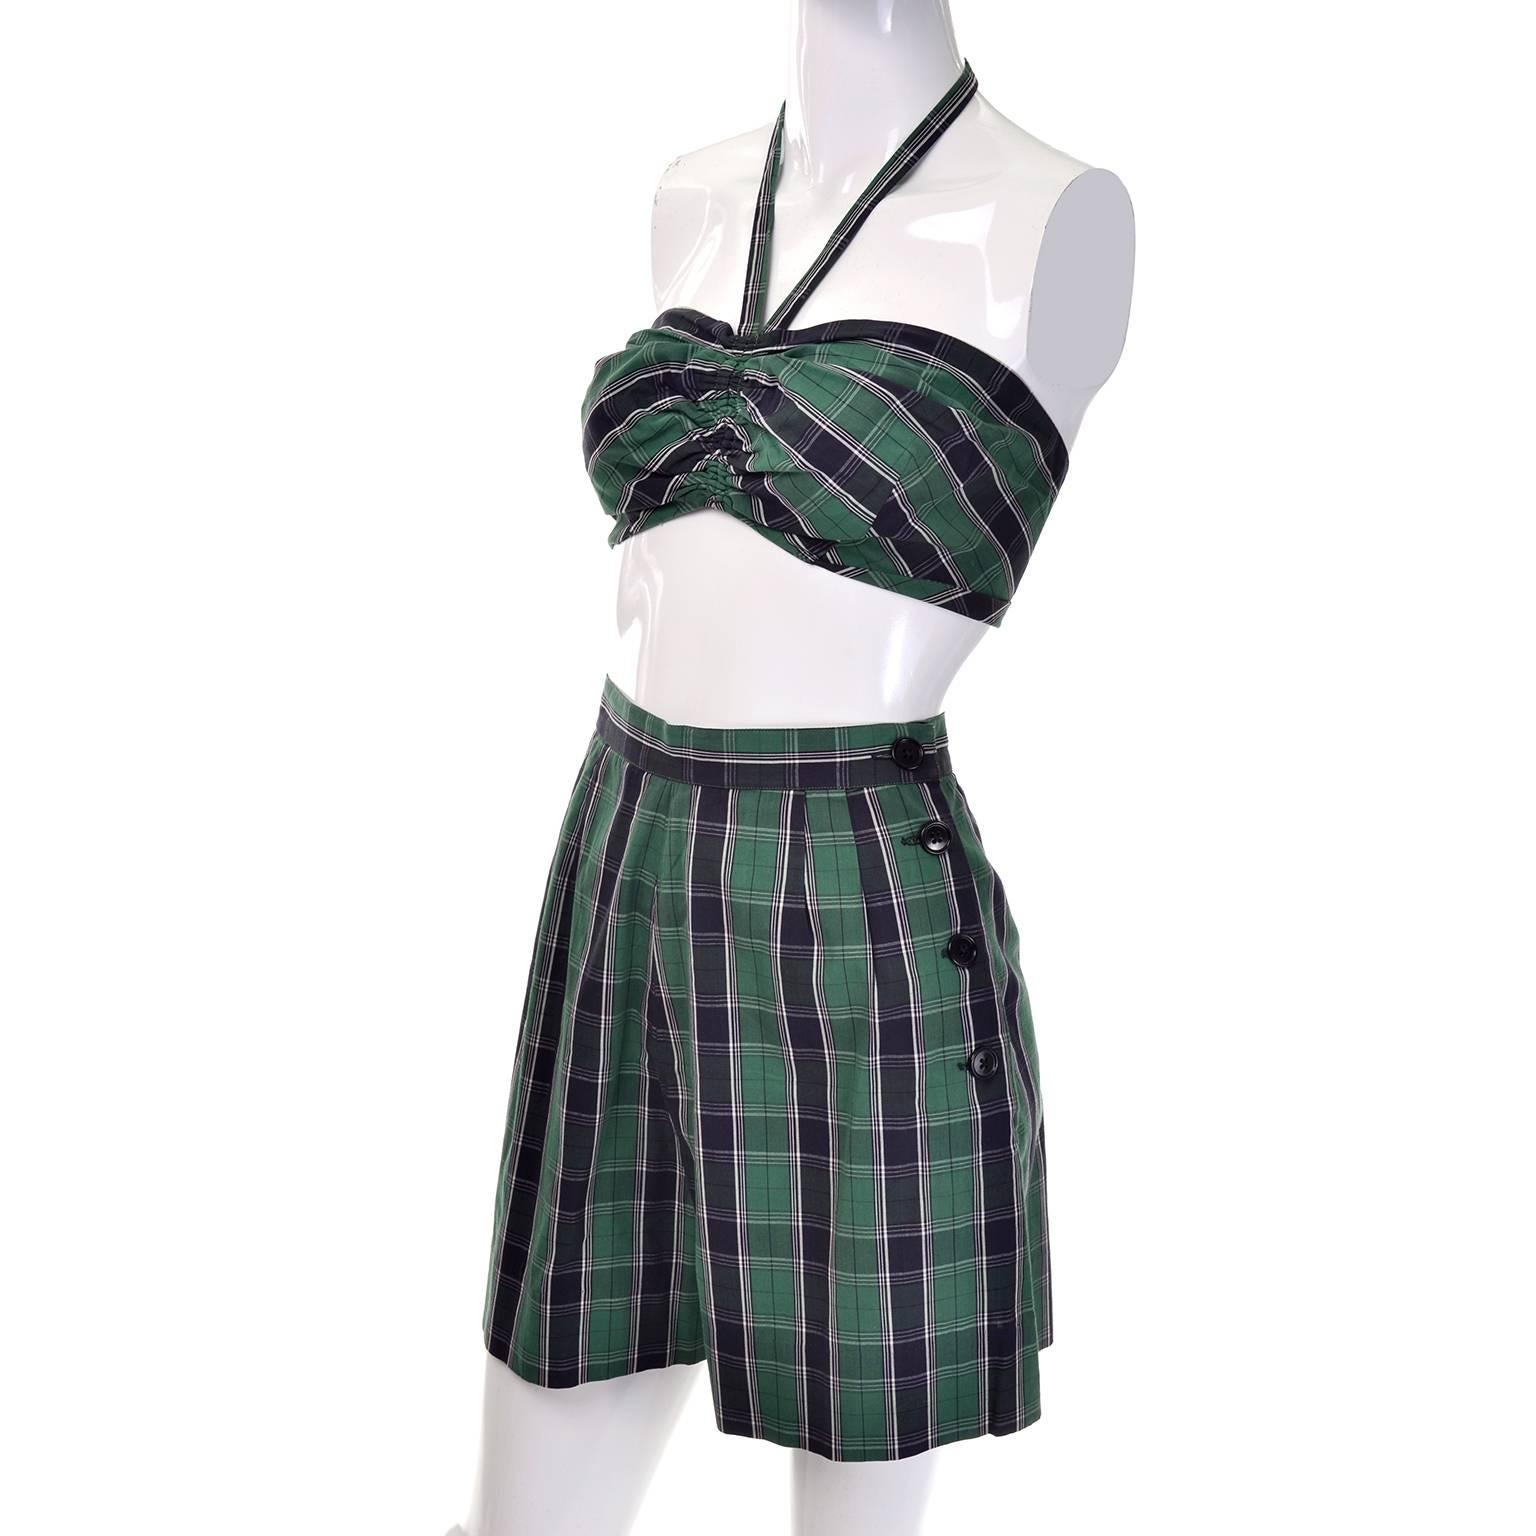 This is a sensational vintage 1950's 3 piece sunsuit or playsuit designed by Dorothy Cox for McMullen Glen Falls, NY, in green and navy blue plaid cotton! The McMullen Company was known for its tailored women's sportswear and shirts.  Marilyn Monroe